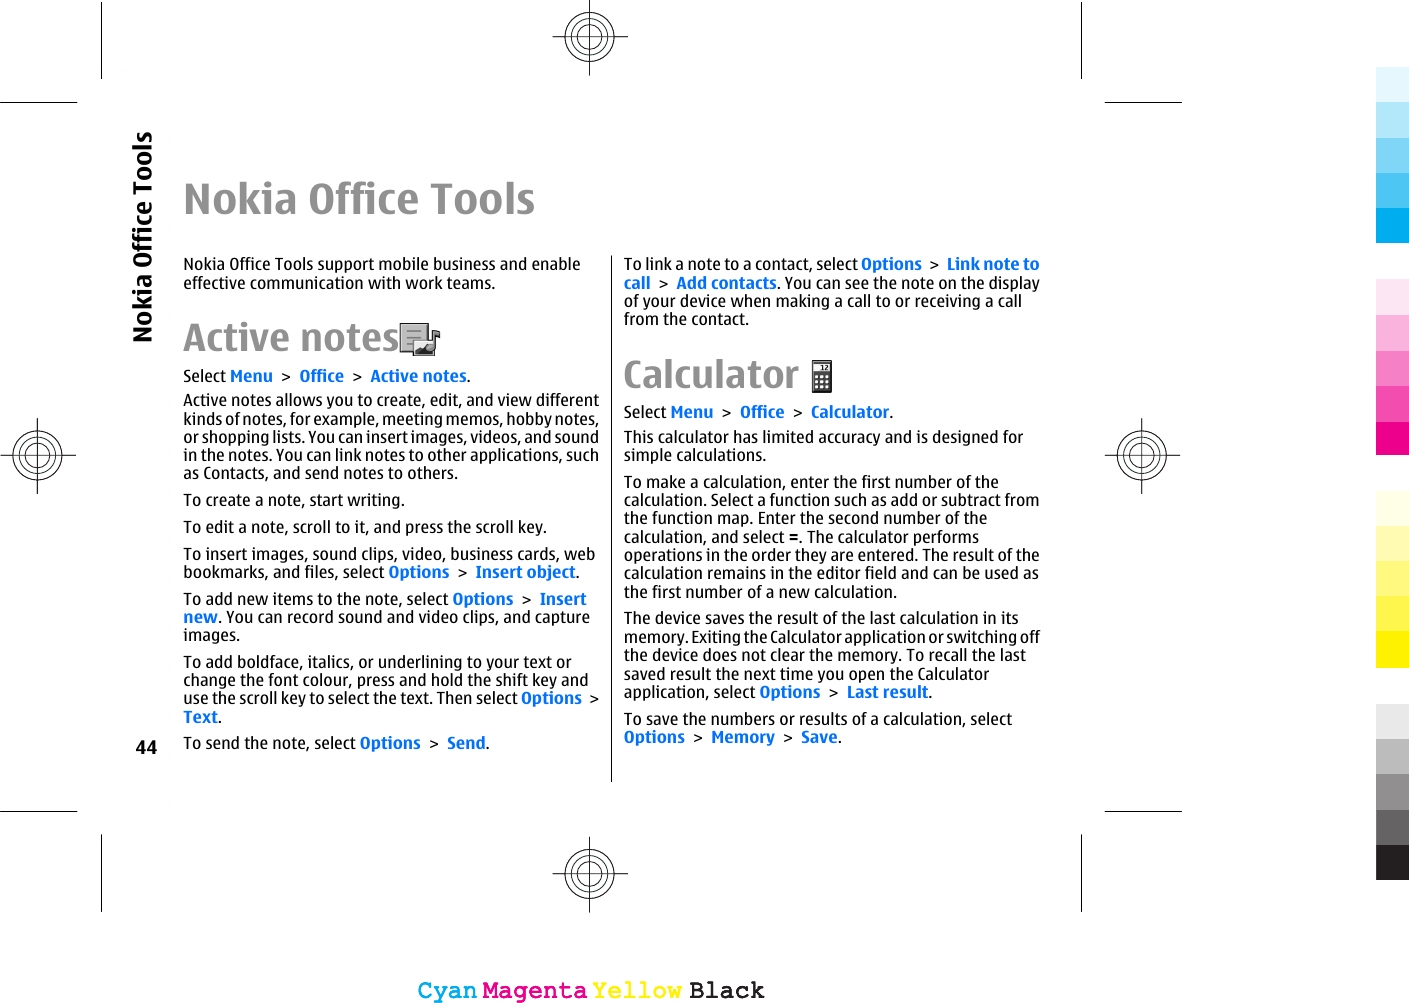 Nokia Office ToolsNokia Office Tools support mobile business and enableeffective communication with work teams.Active notes  Select Menu &gt; Office &gt; Active notes.Active notes allows you to create, edit, and view differentkinds of notes, for example, meeting memos, hobby notes,or shopping lists. You can insert images, videos, and soundin the notes. You can link notes to other applications, suchas Contacts, and send notes to others.To create a note, start writing.To edit a note, scroll to it, and press the scroll key.To insert images, sound clips, video, business cards, webbookmarks, and files, select Options &gt; Insert object.To add new items to the note, select Options &gt; Insertnew. You can record sound and video clips, and captureimages.To add boldface, italics, or underlining to your text orchange the font colour, press and hold the shift key anduse the scroll key to select the text. Then select Options &gt;Text.To send the note, select Options &gt; Send.To link a note to a contact, select Options &gt; Link note tocall &gt; Add contacts. You can see the note on the displayof your device when making a call to or receiving a callfrom the contact.CalculatorSelect Menu &gt; Office &gt; Calculator.This calculator has limited accuracy and is designed forsimple calculations.To make a calculation, enter the first number of thecalculation. Select a function such as add or subtract fromthe function map. Enter the second number of thecalculation, and select =. The calculator performsoperations in the order they are entered. The result of thecalculation remains in the editor field and can be used asthe first number of a new calculation.The device saves the result of the last calculation in itsmemory. Exiting the Calculator application or switching offthe device does not clear the memory. To recall the lastsaved result the next time you open the Calculatorapplication, select Options &gt; Last result.To save the numbers or results of a calculation, selectOptions &gt; Memory &gt; Save.44Nokia Office ToolsCyanCyanMagentaMagentaYellowYellowBlackBlackCyanCyanMagentaMagentaYellowYellowBlackBlack